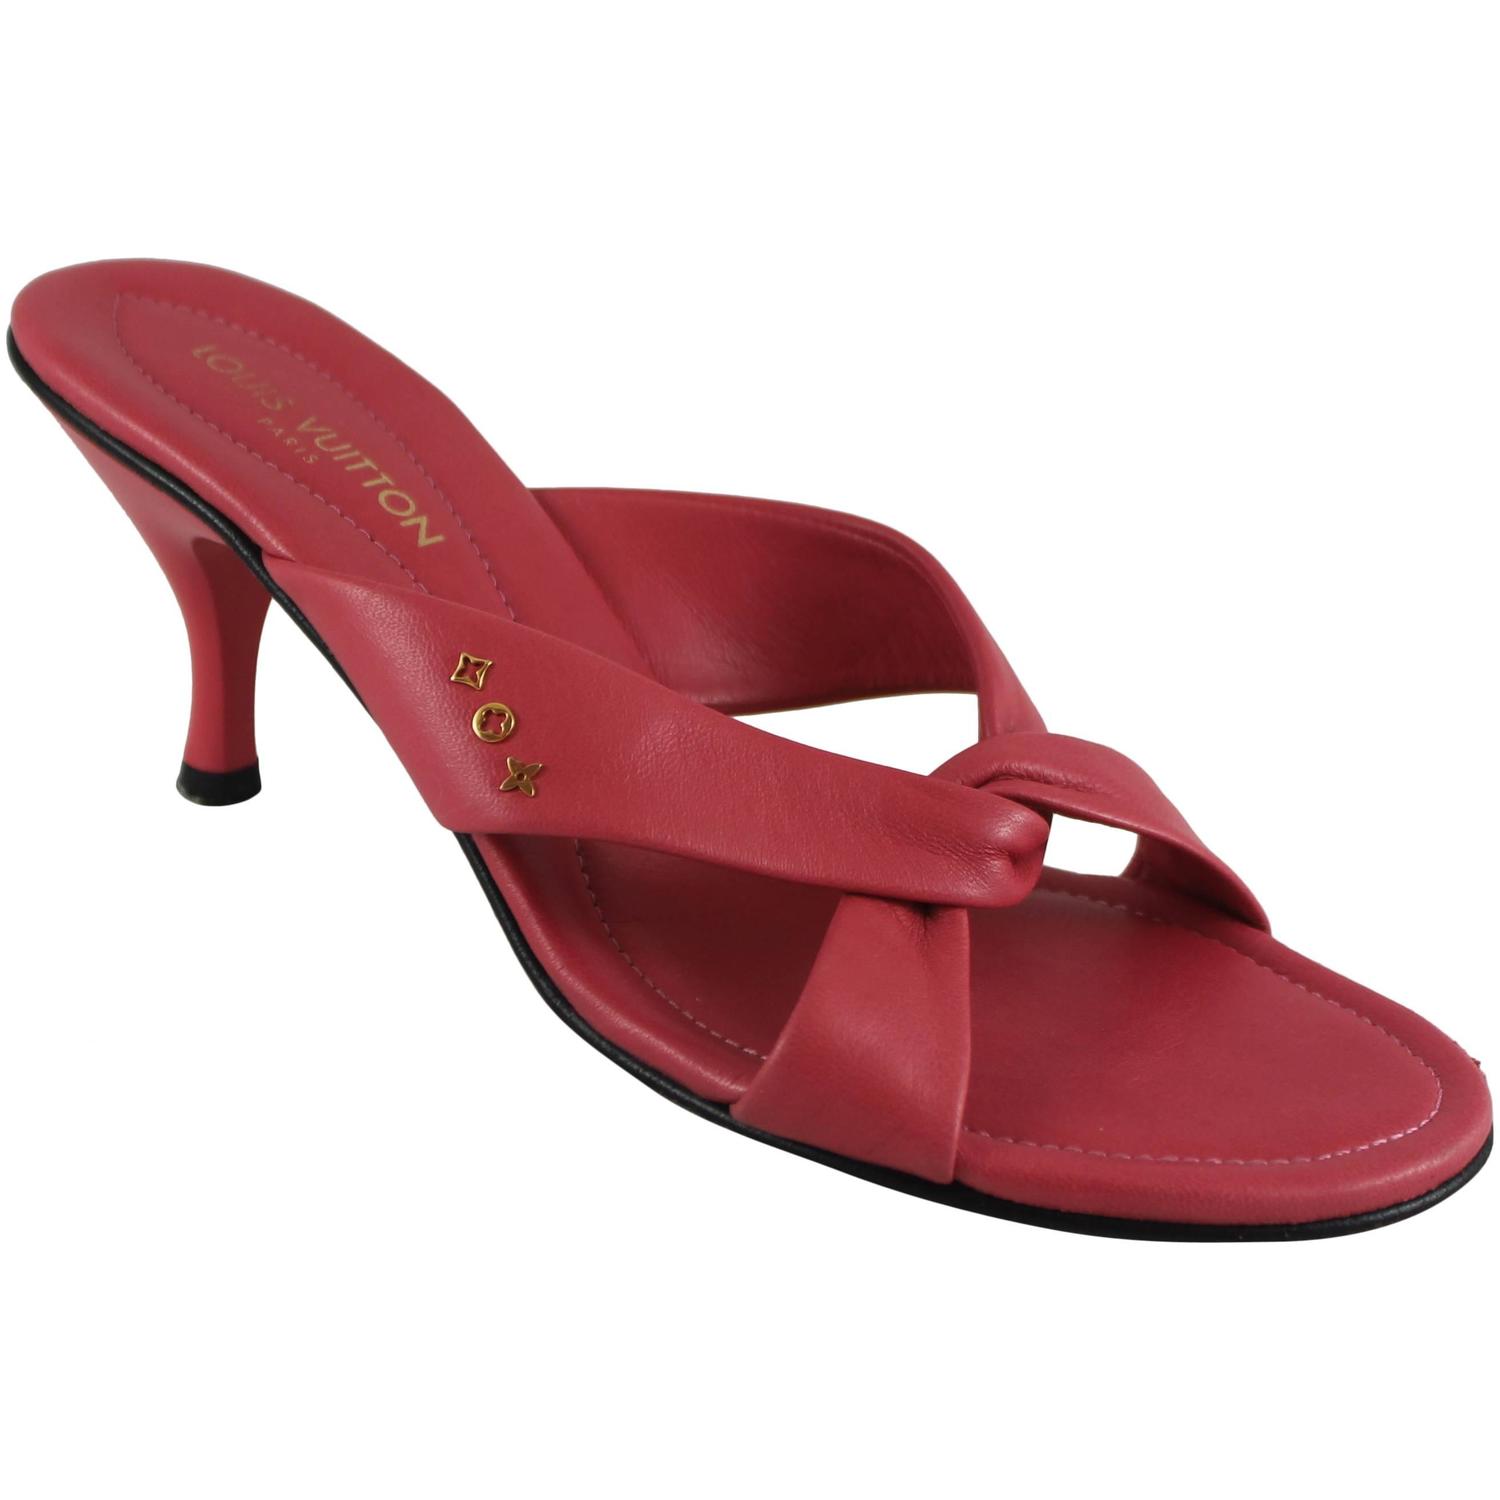 Louis Vuitton, Shoes, So Late Red Bottom 2 Inch Heel